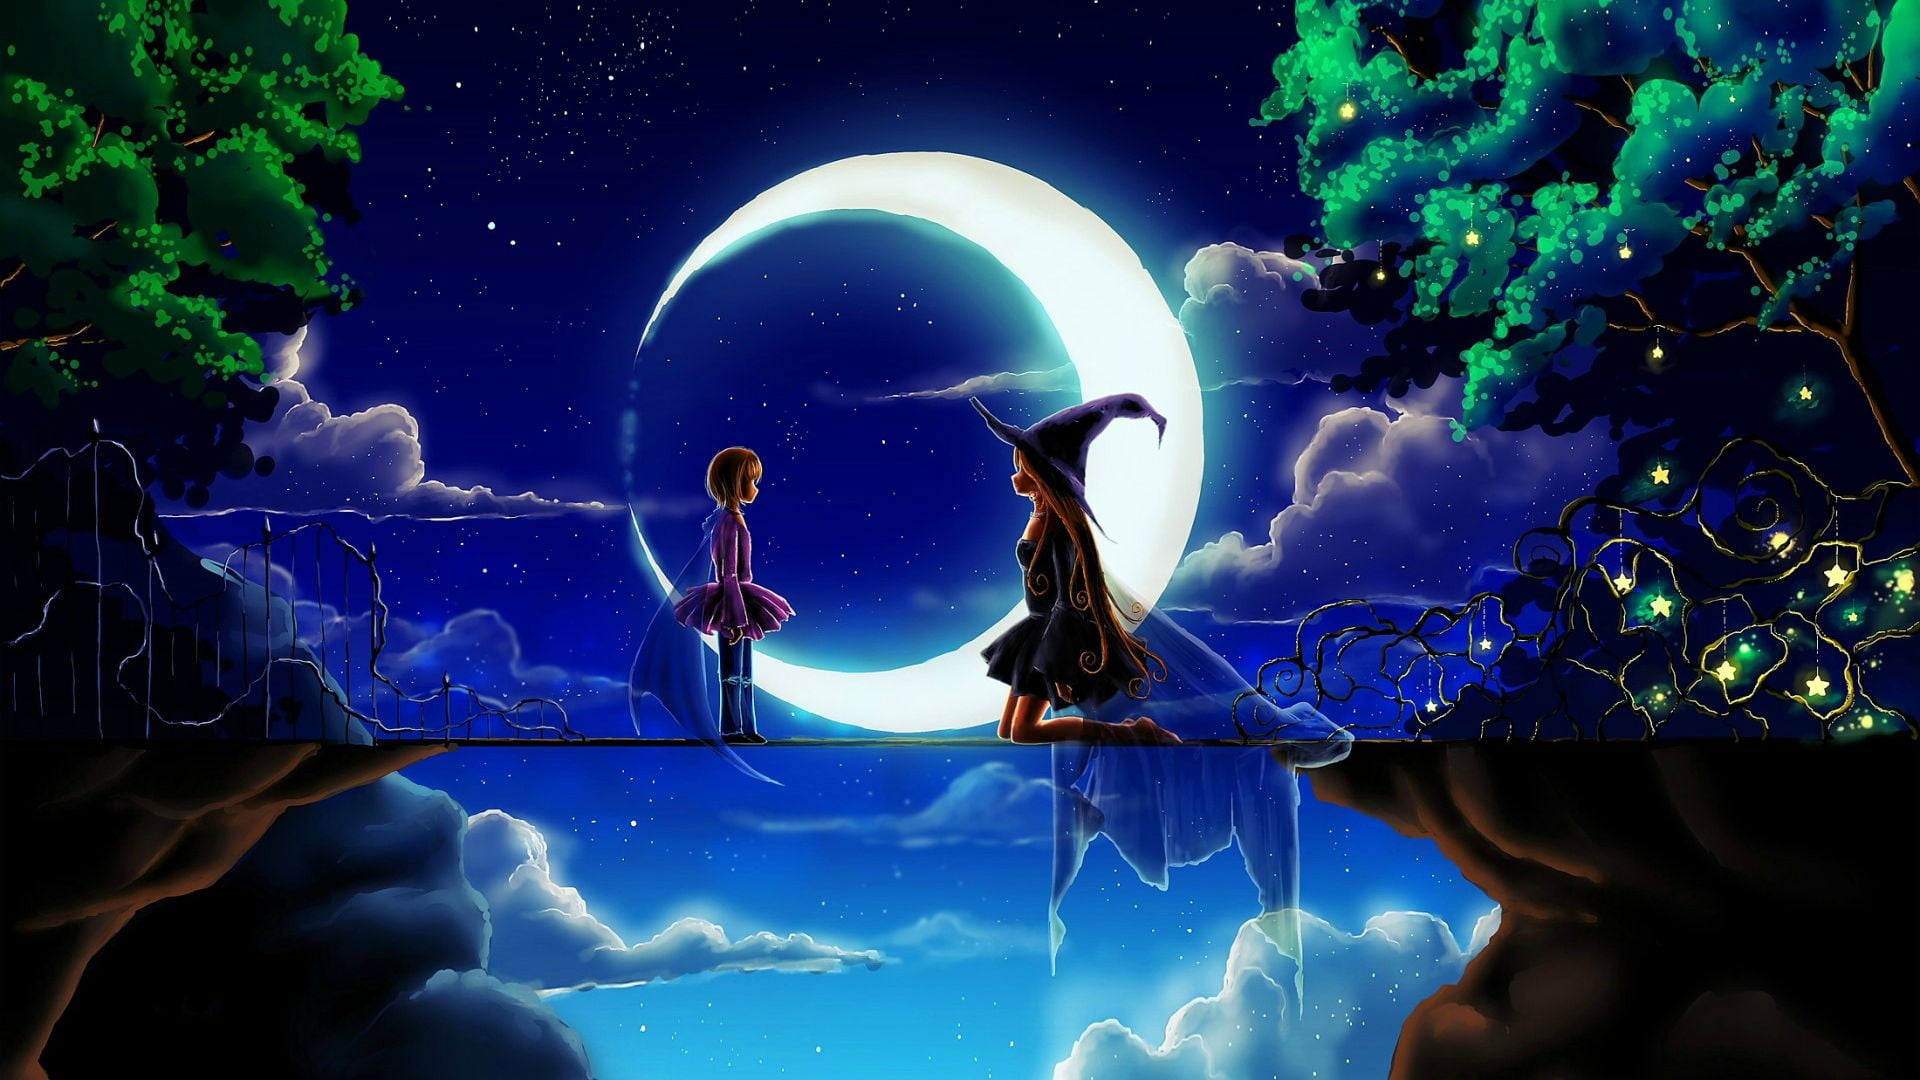 Girl And Witch Wallpaper Anime Anime Girls Night Sky Hd